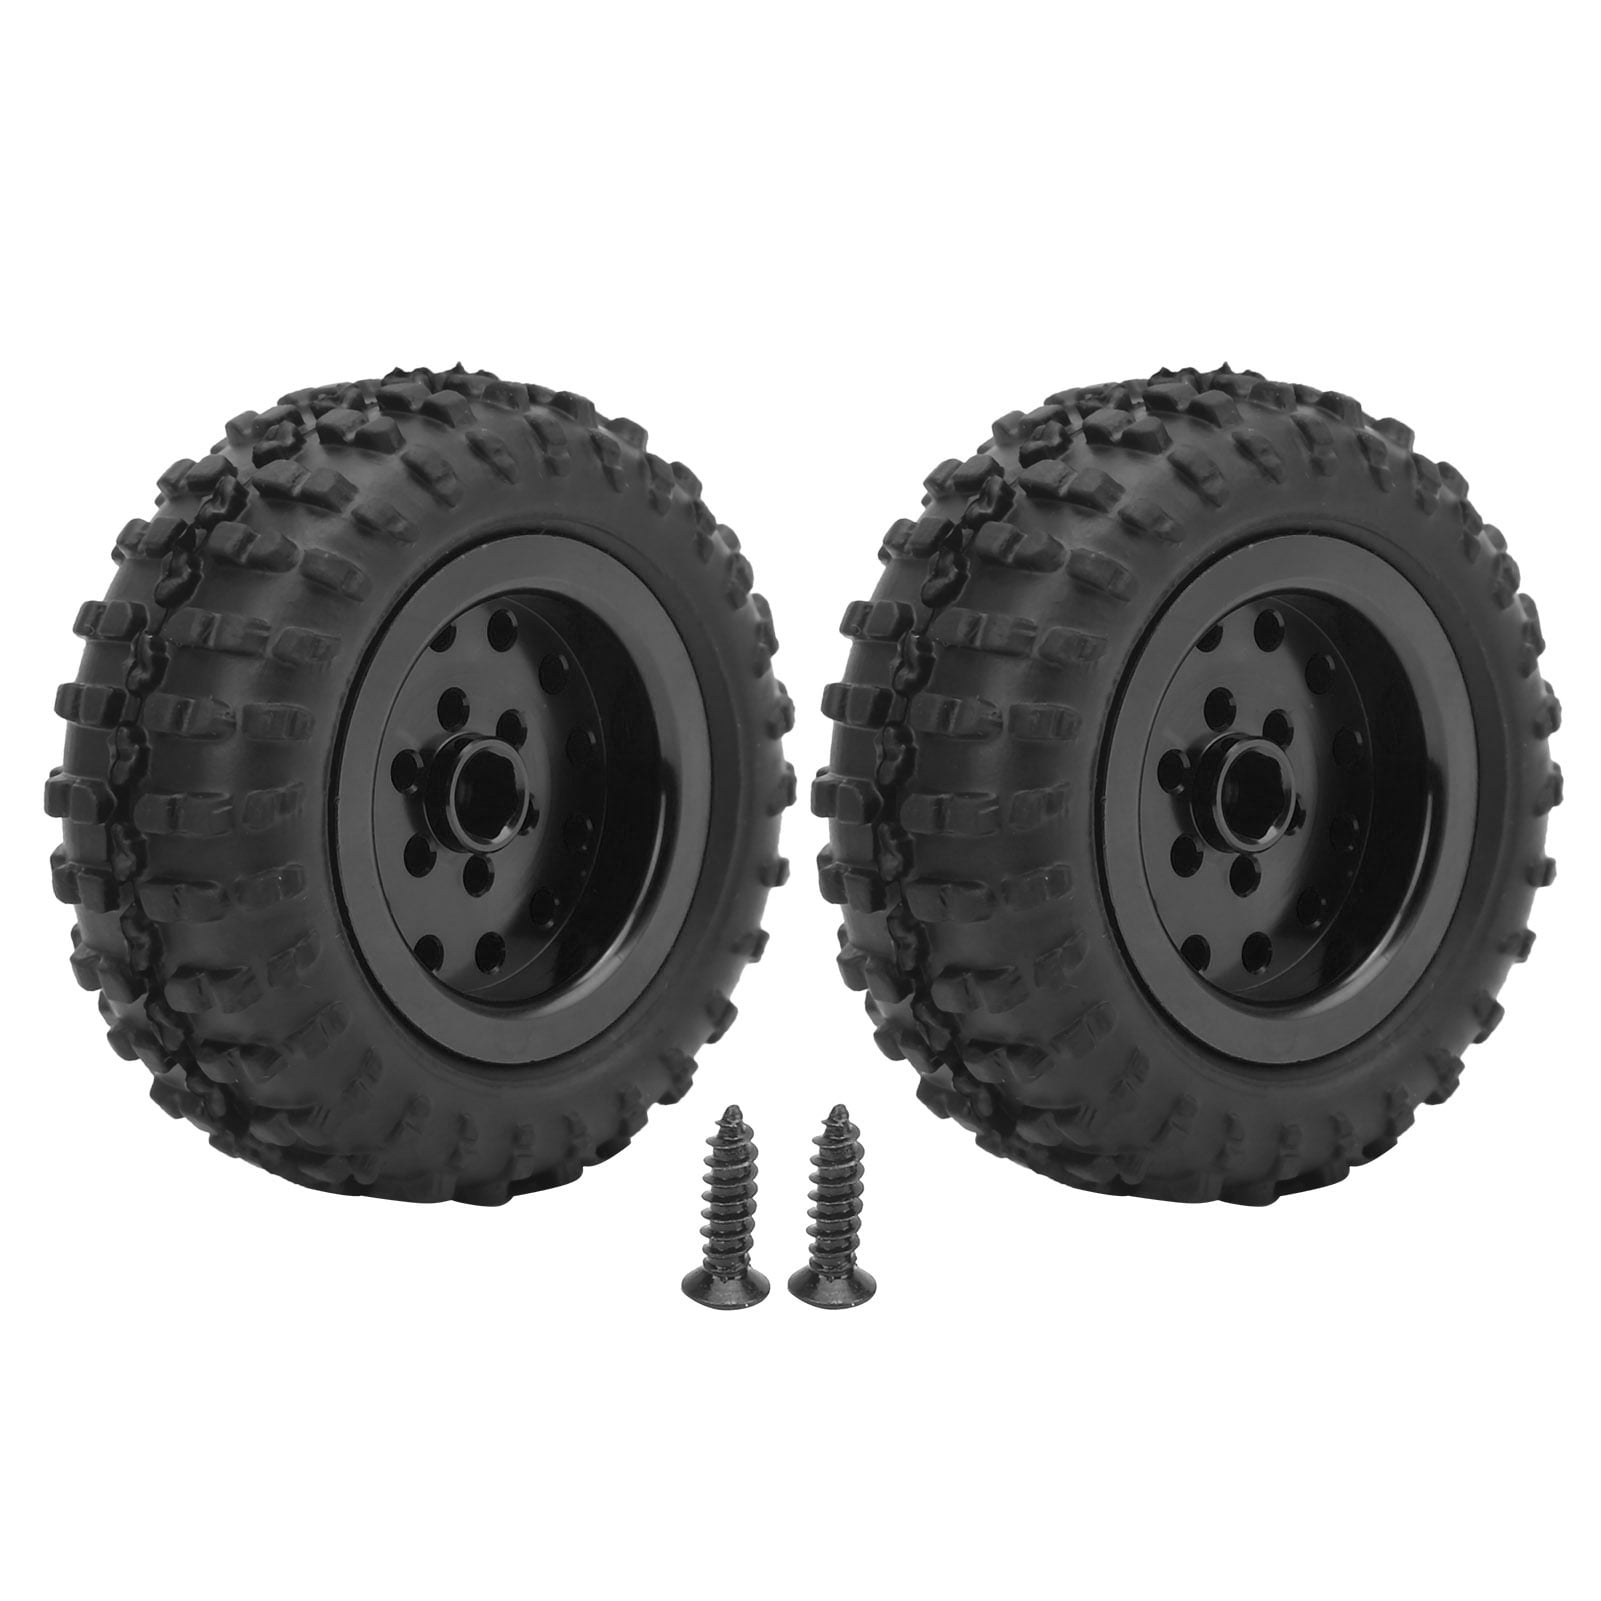 Details about   2Pcs 52mm Al Alloy Rear Tire Equipment For WPL D12 1/10 RC Truck Vehicle Red